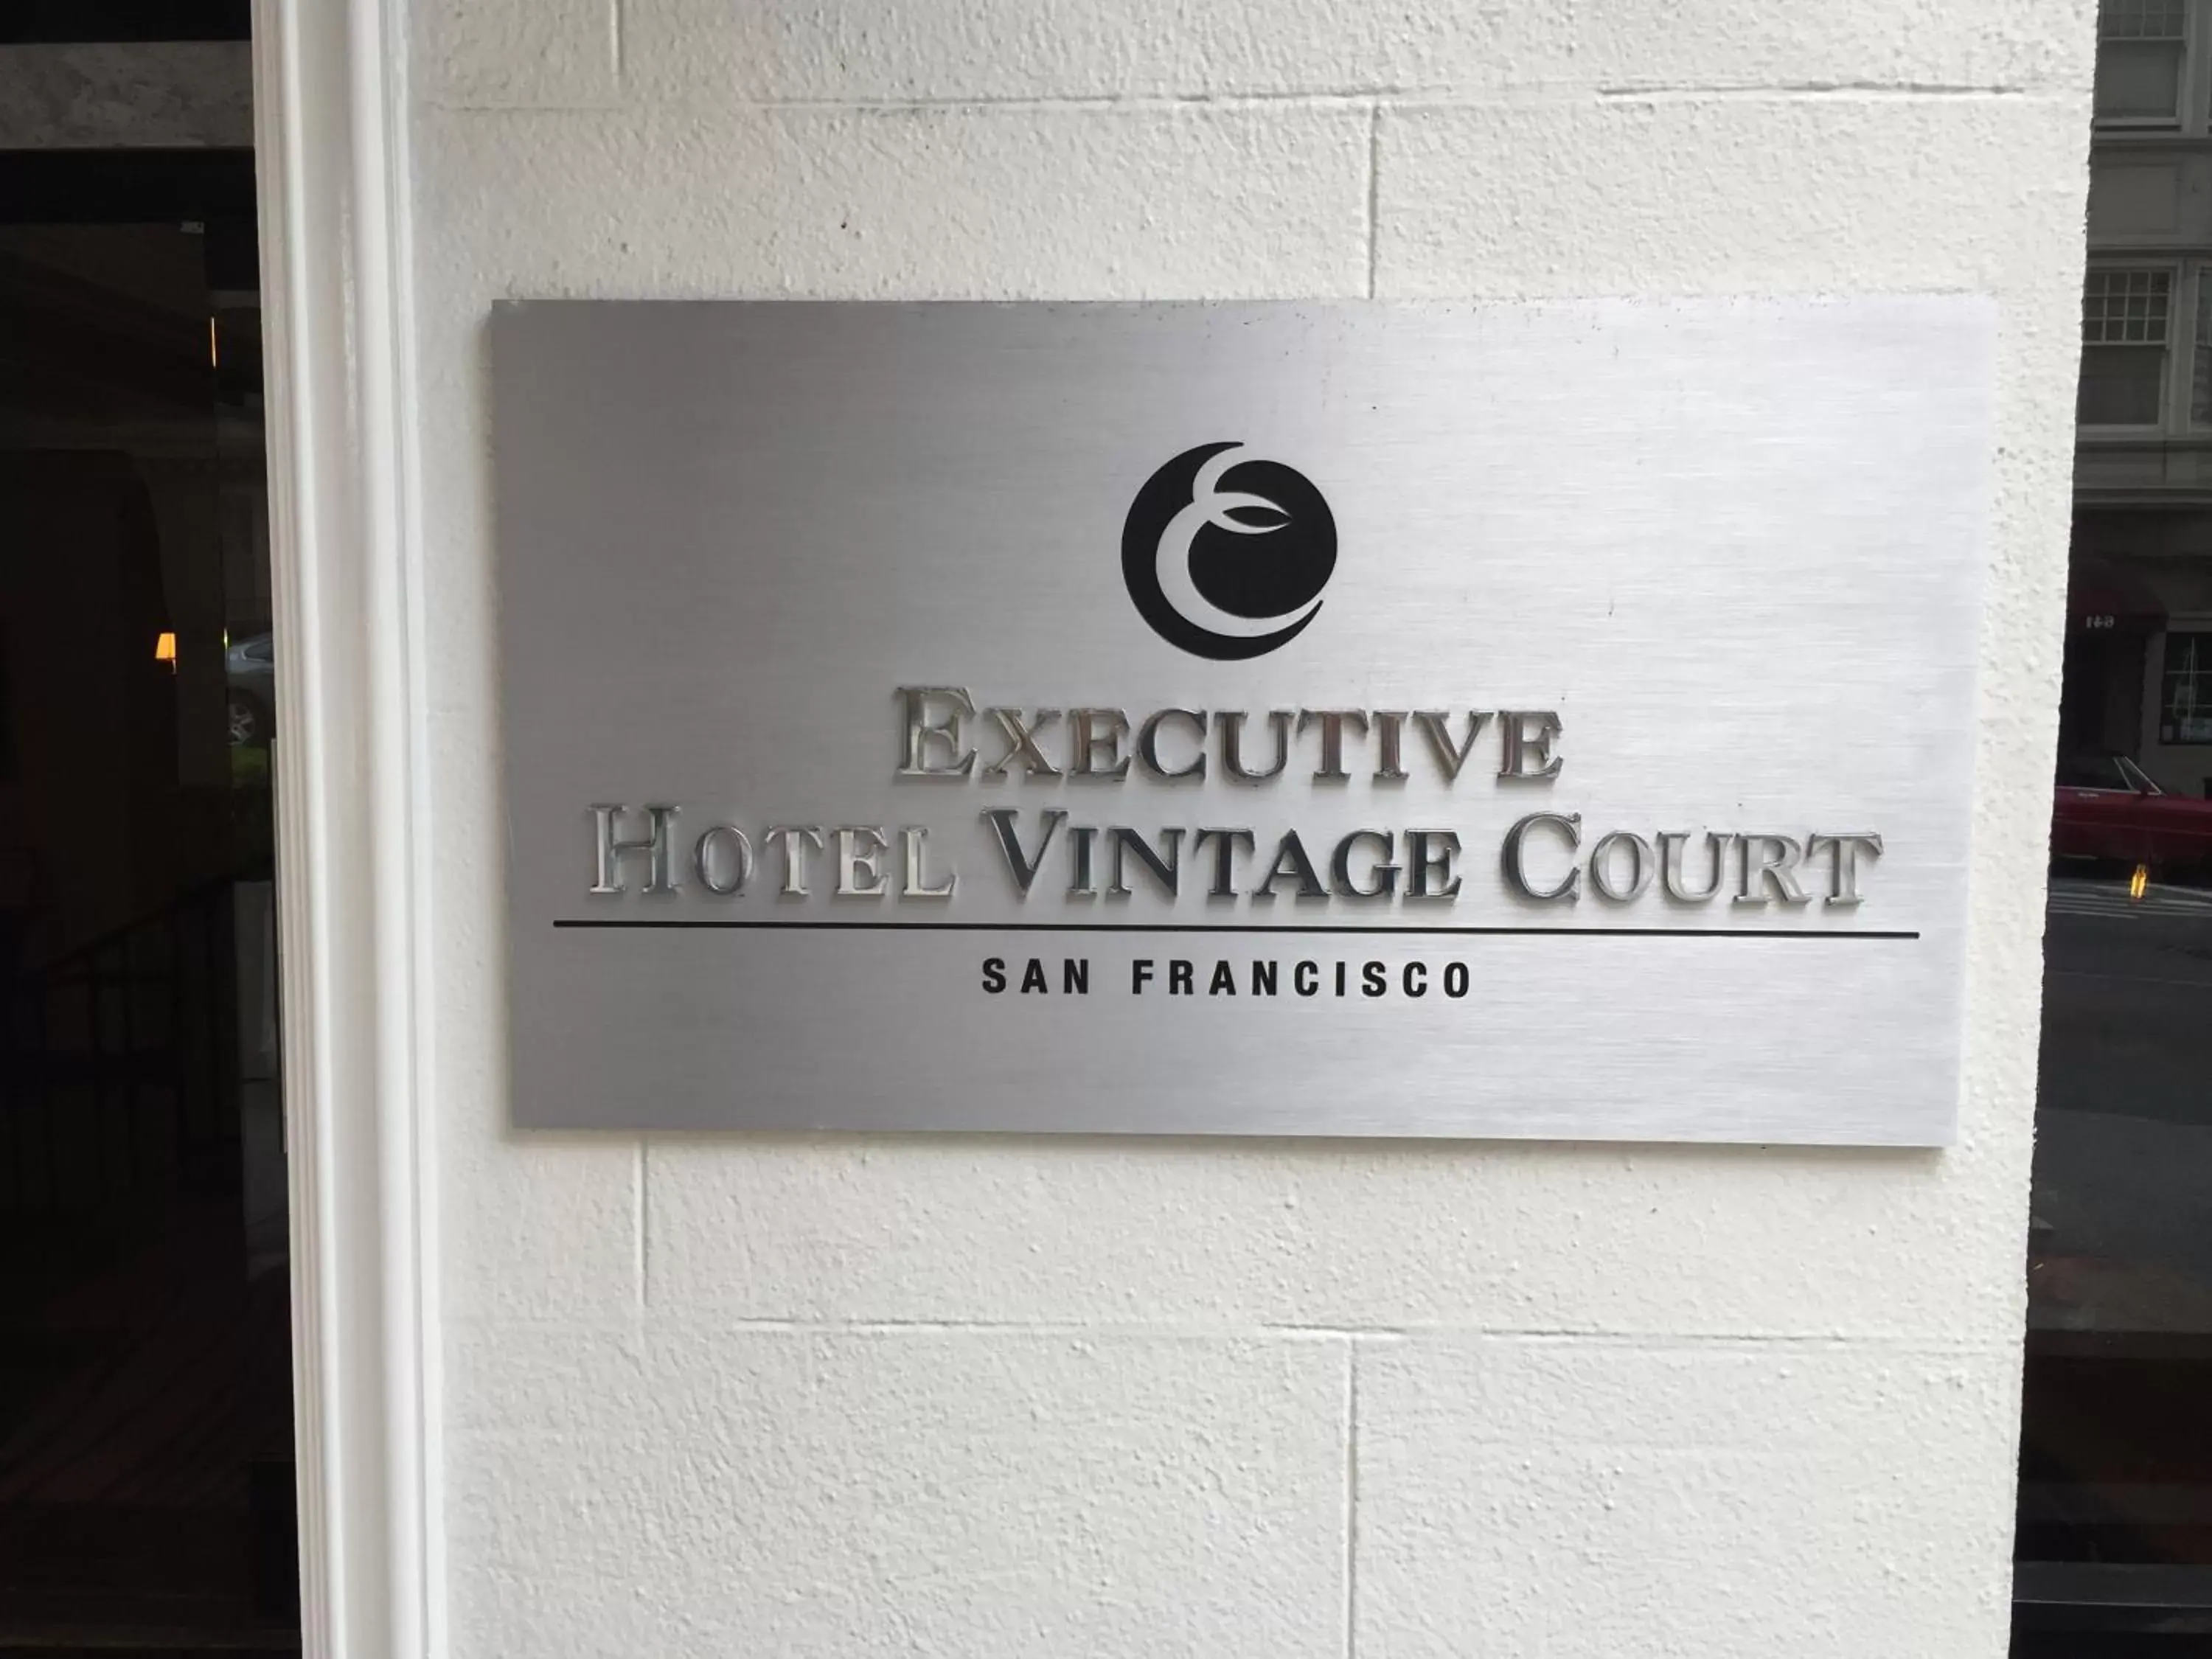 Property logo or sign in Executive Hotel Vintage Court